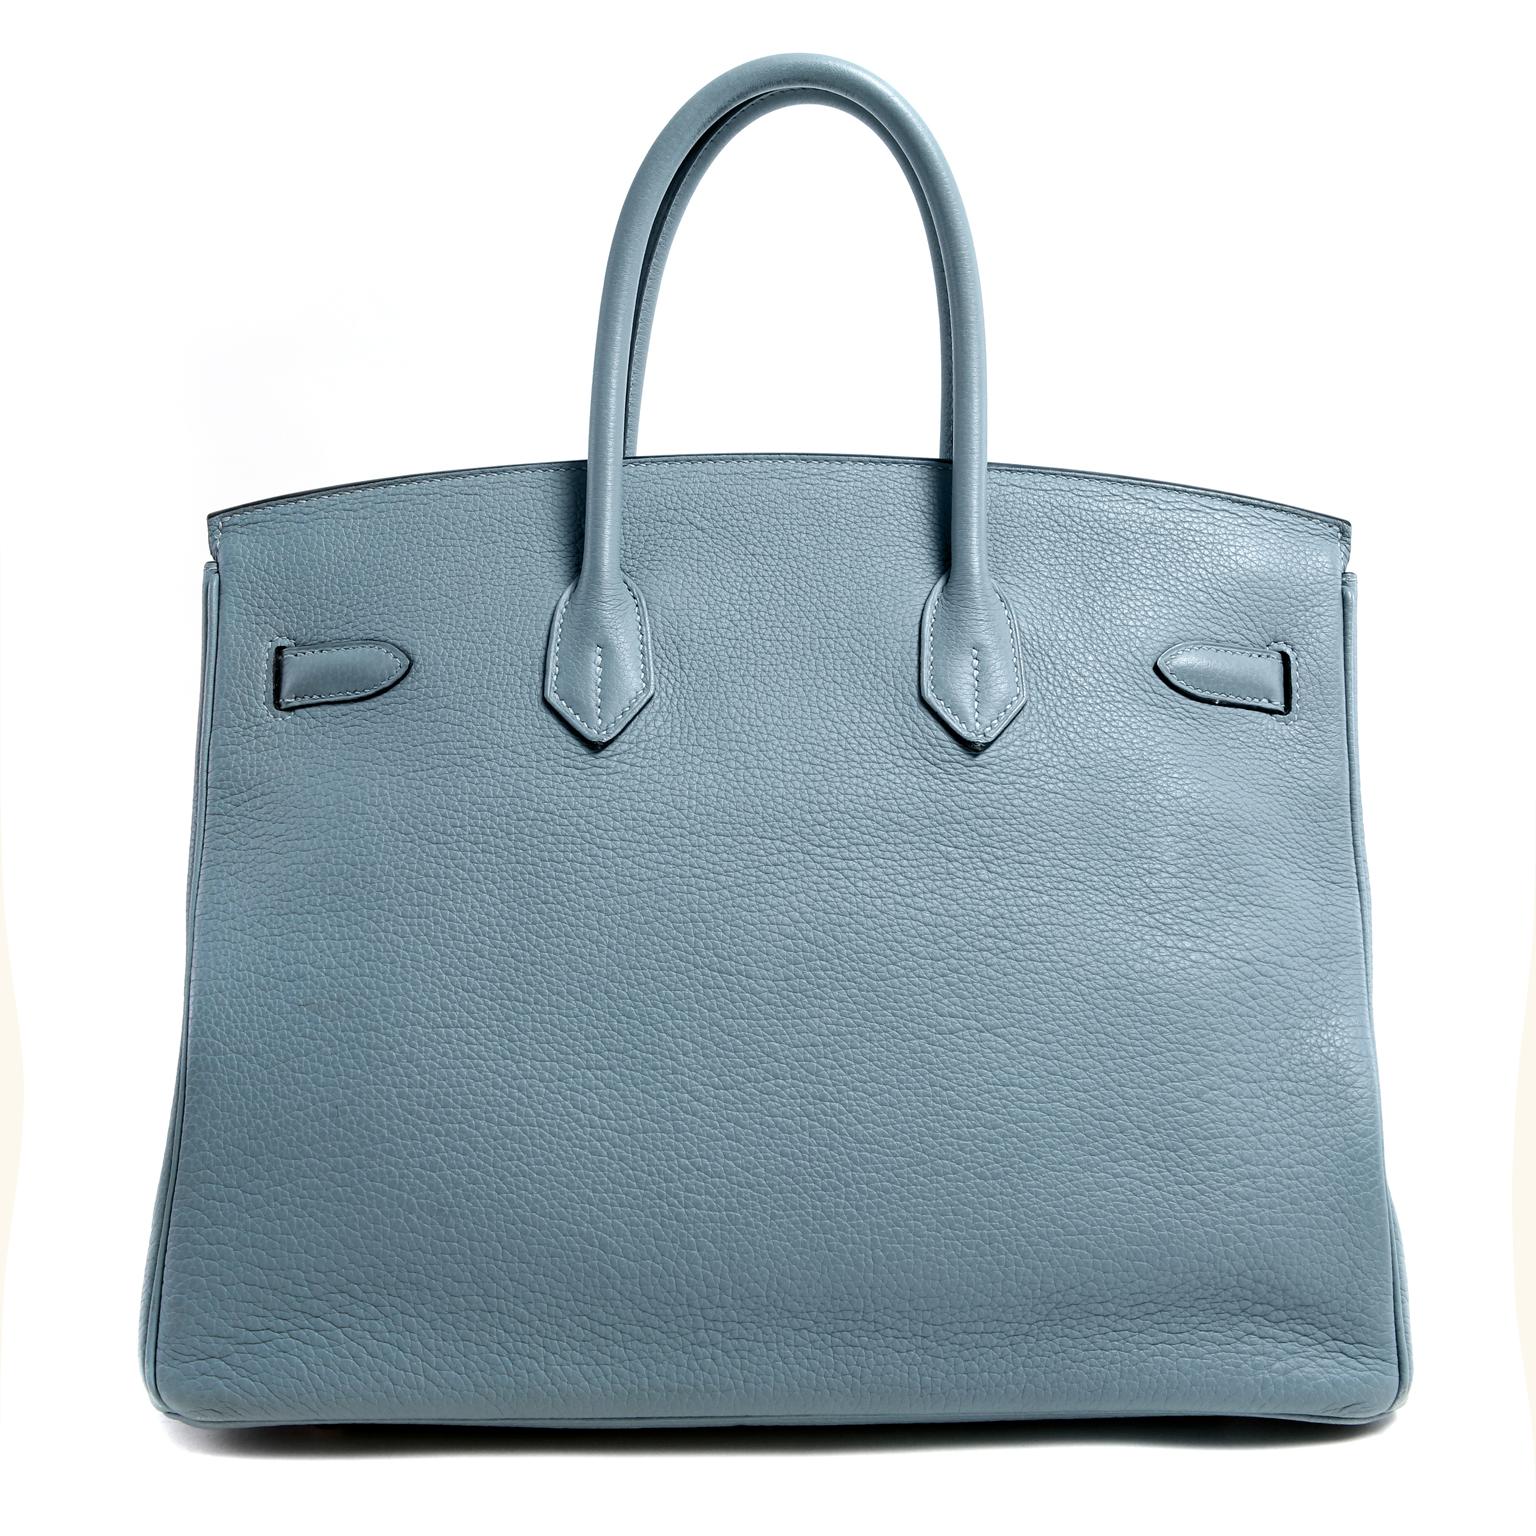 This authentic Hermès Bleu Ciel Clemence 35 cm Birkin is in excellent condition. Hermès bags are considered the ultimate luxury item the world over.  Hand stitched by skilled craftsmen, wait lists of a year or more are common.  Bleu Ciel is a soft